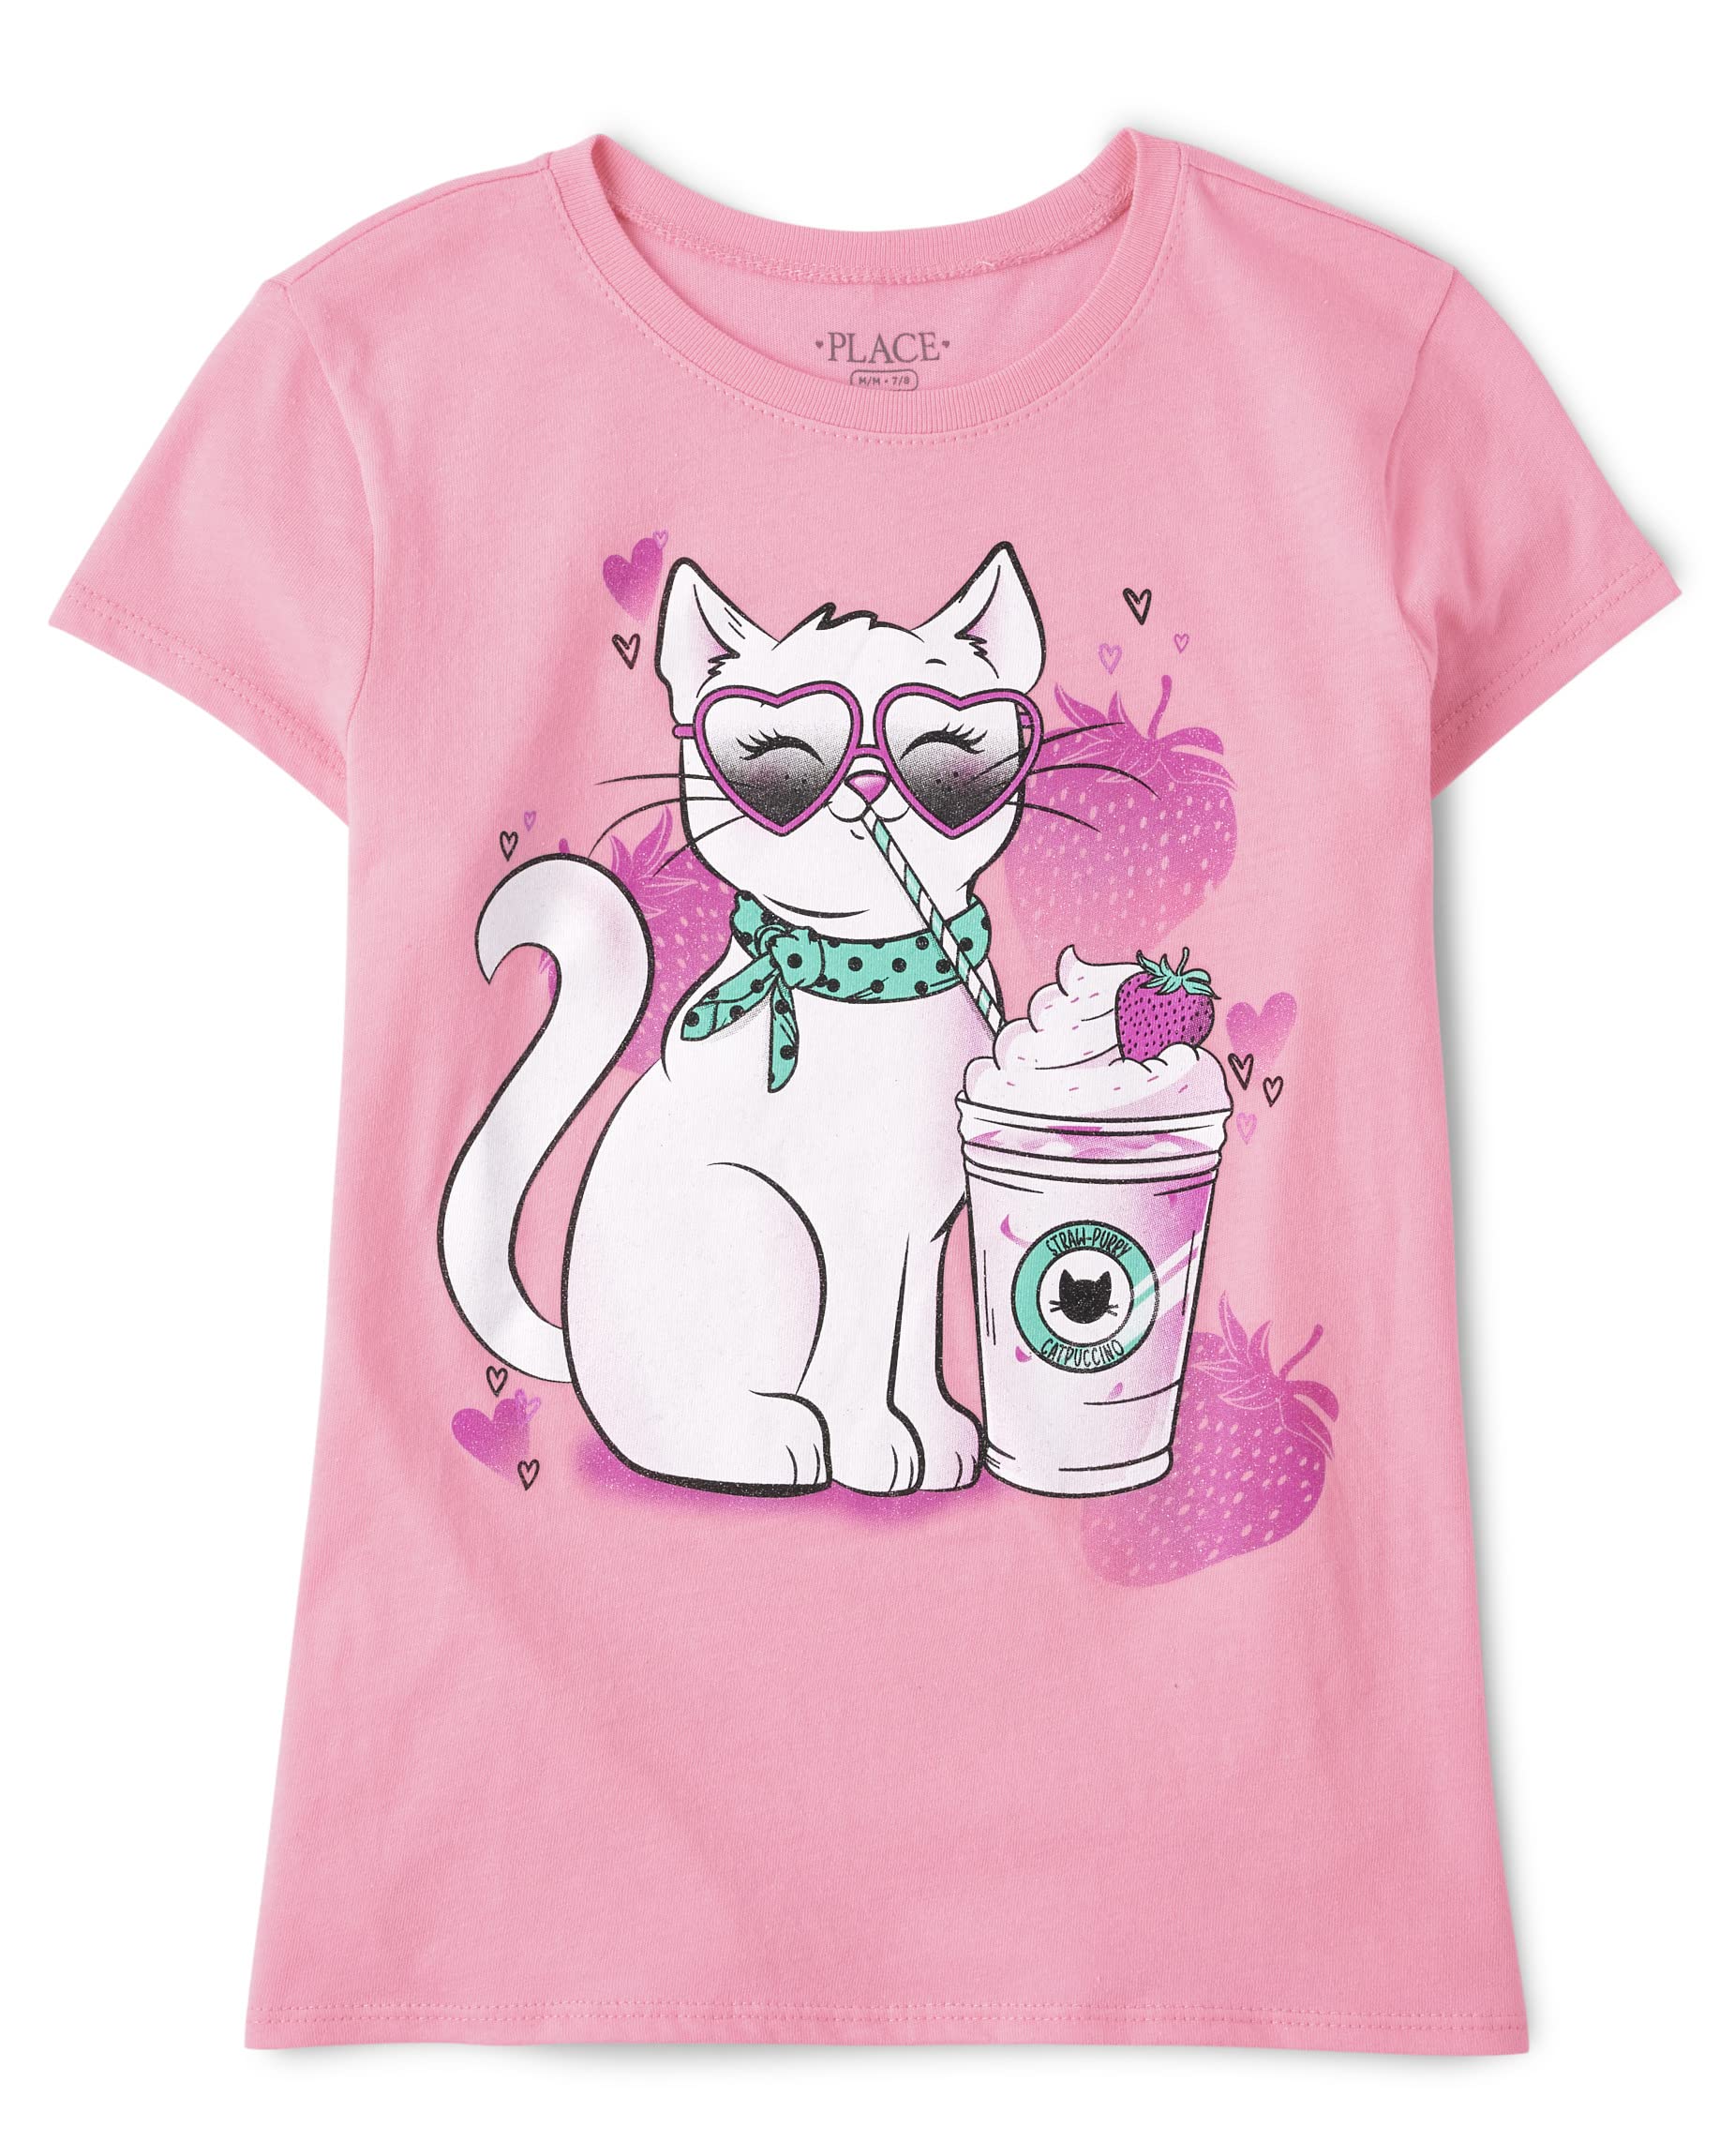 The Children's Place girls Cat Graphic Short Sleeve Tee